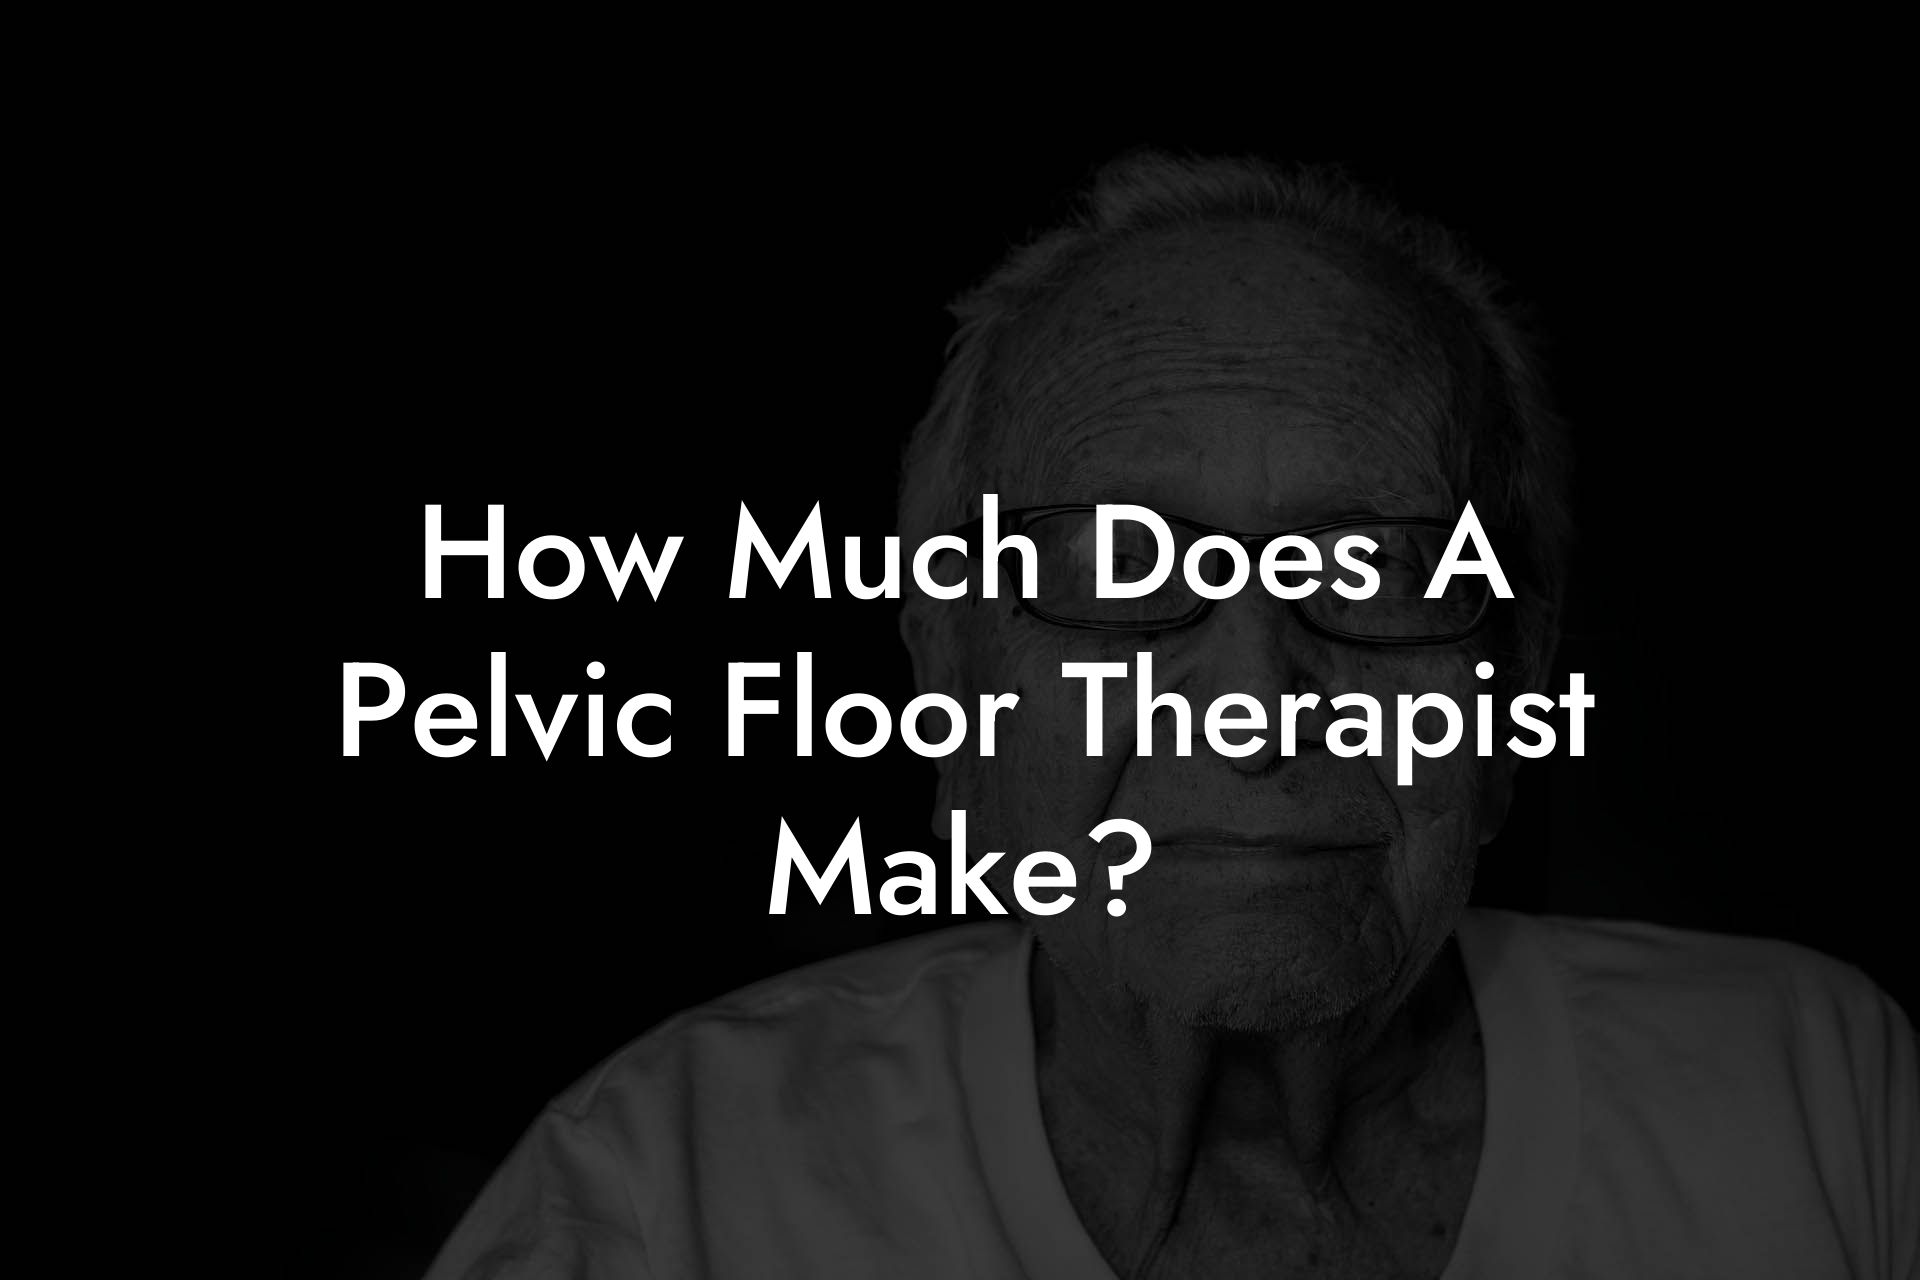 How Much Does A Pelvic Floor Therapist Make?